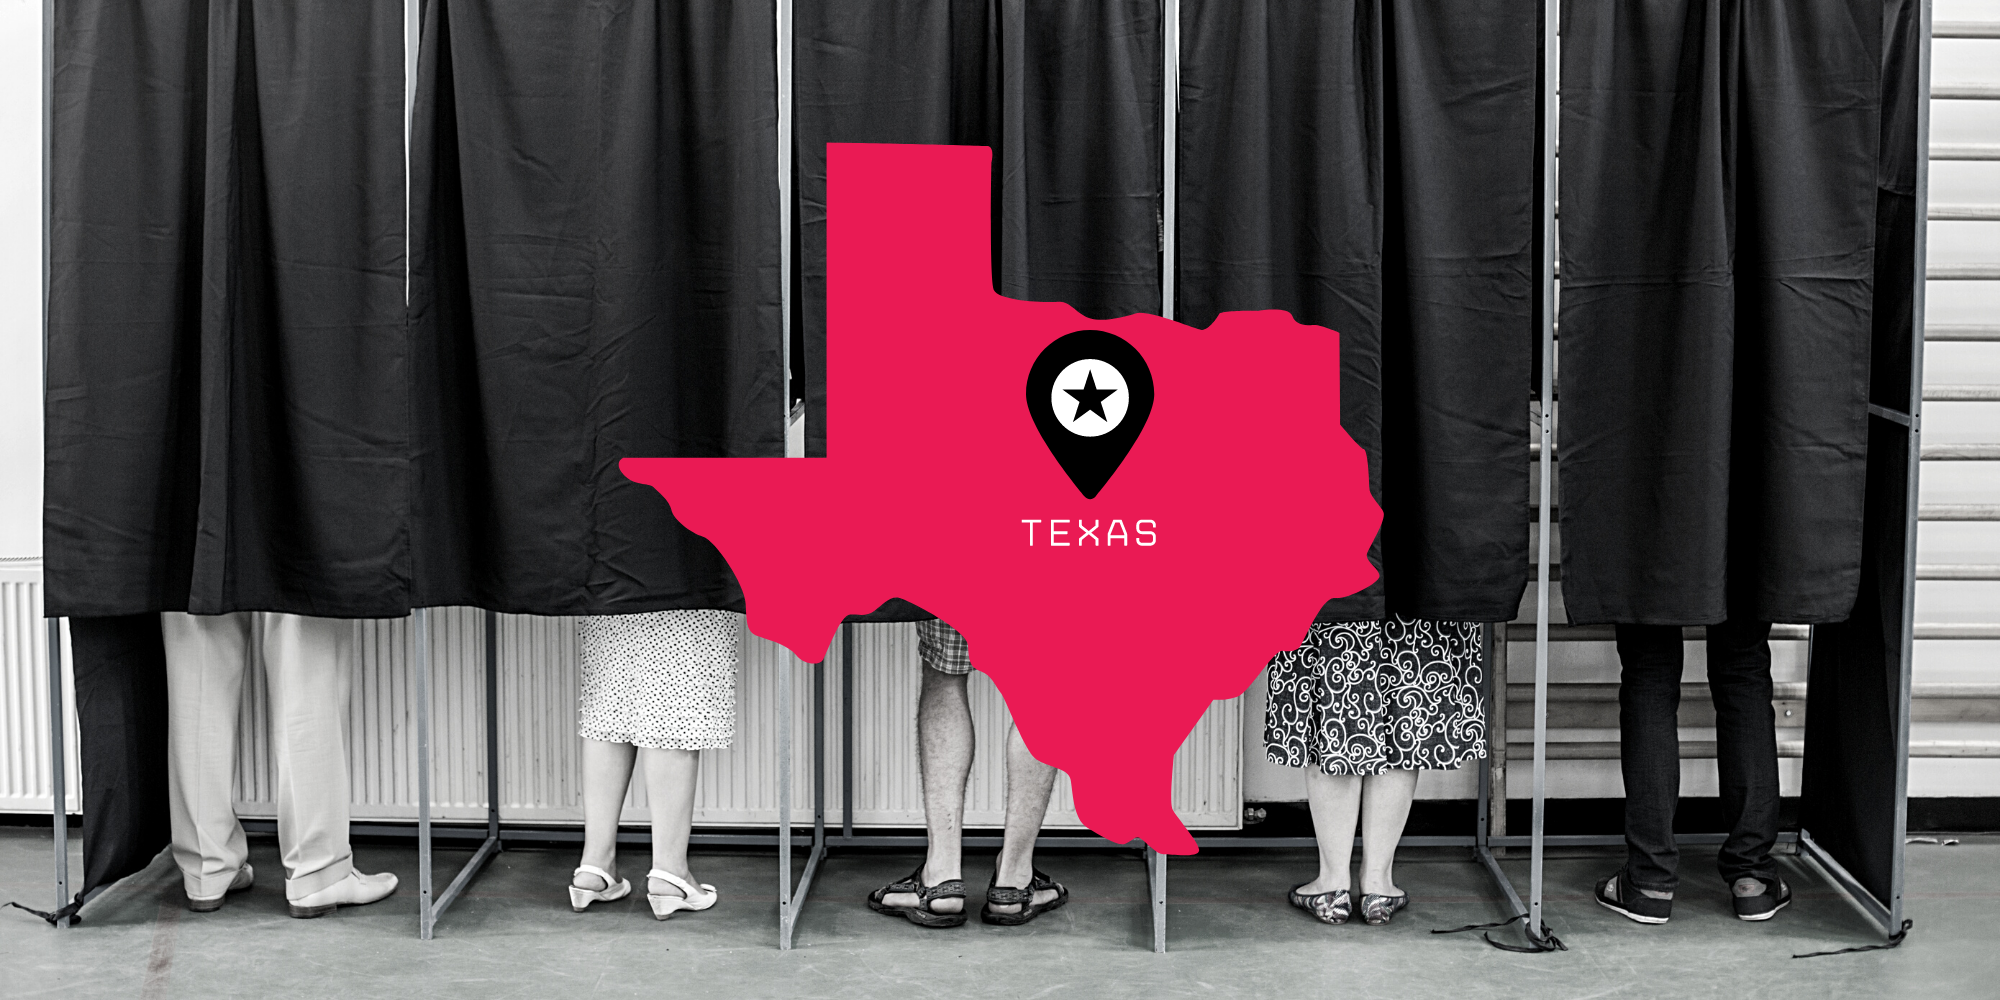 Why is it so hard to vote in Texas?